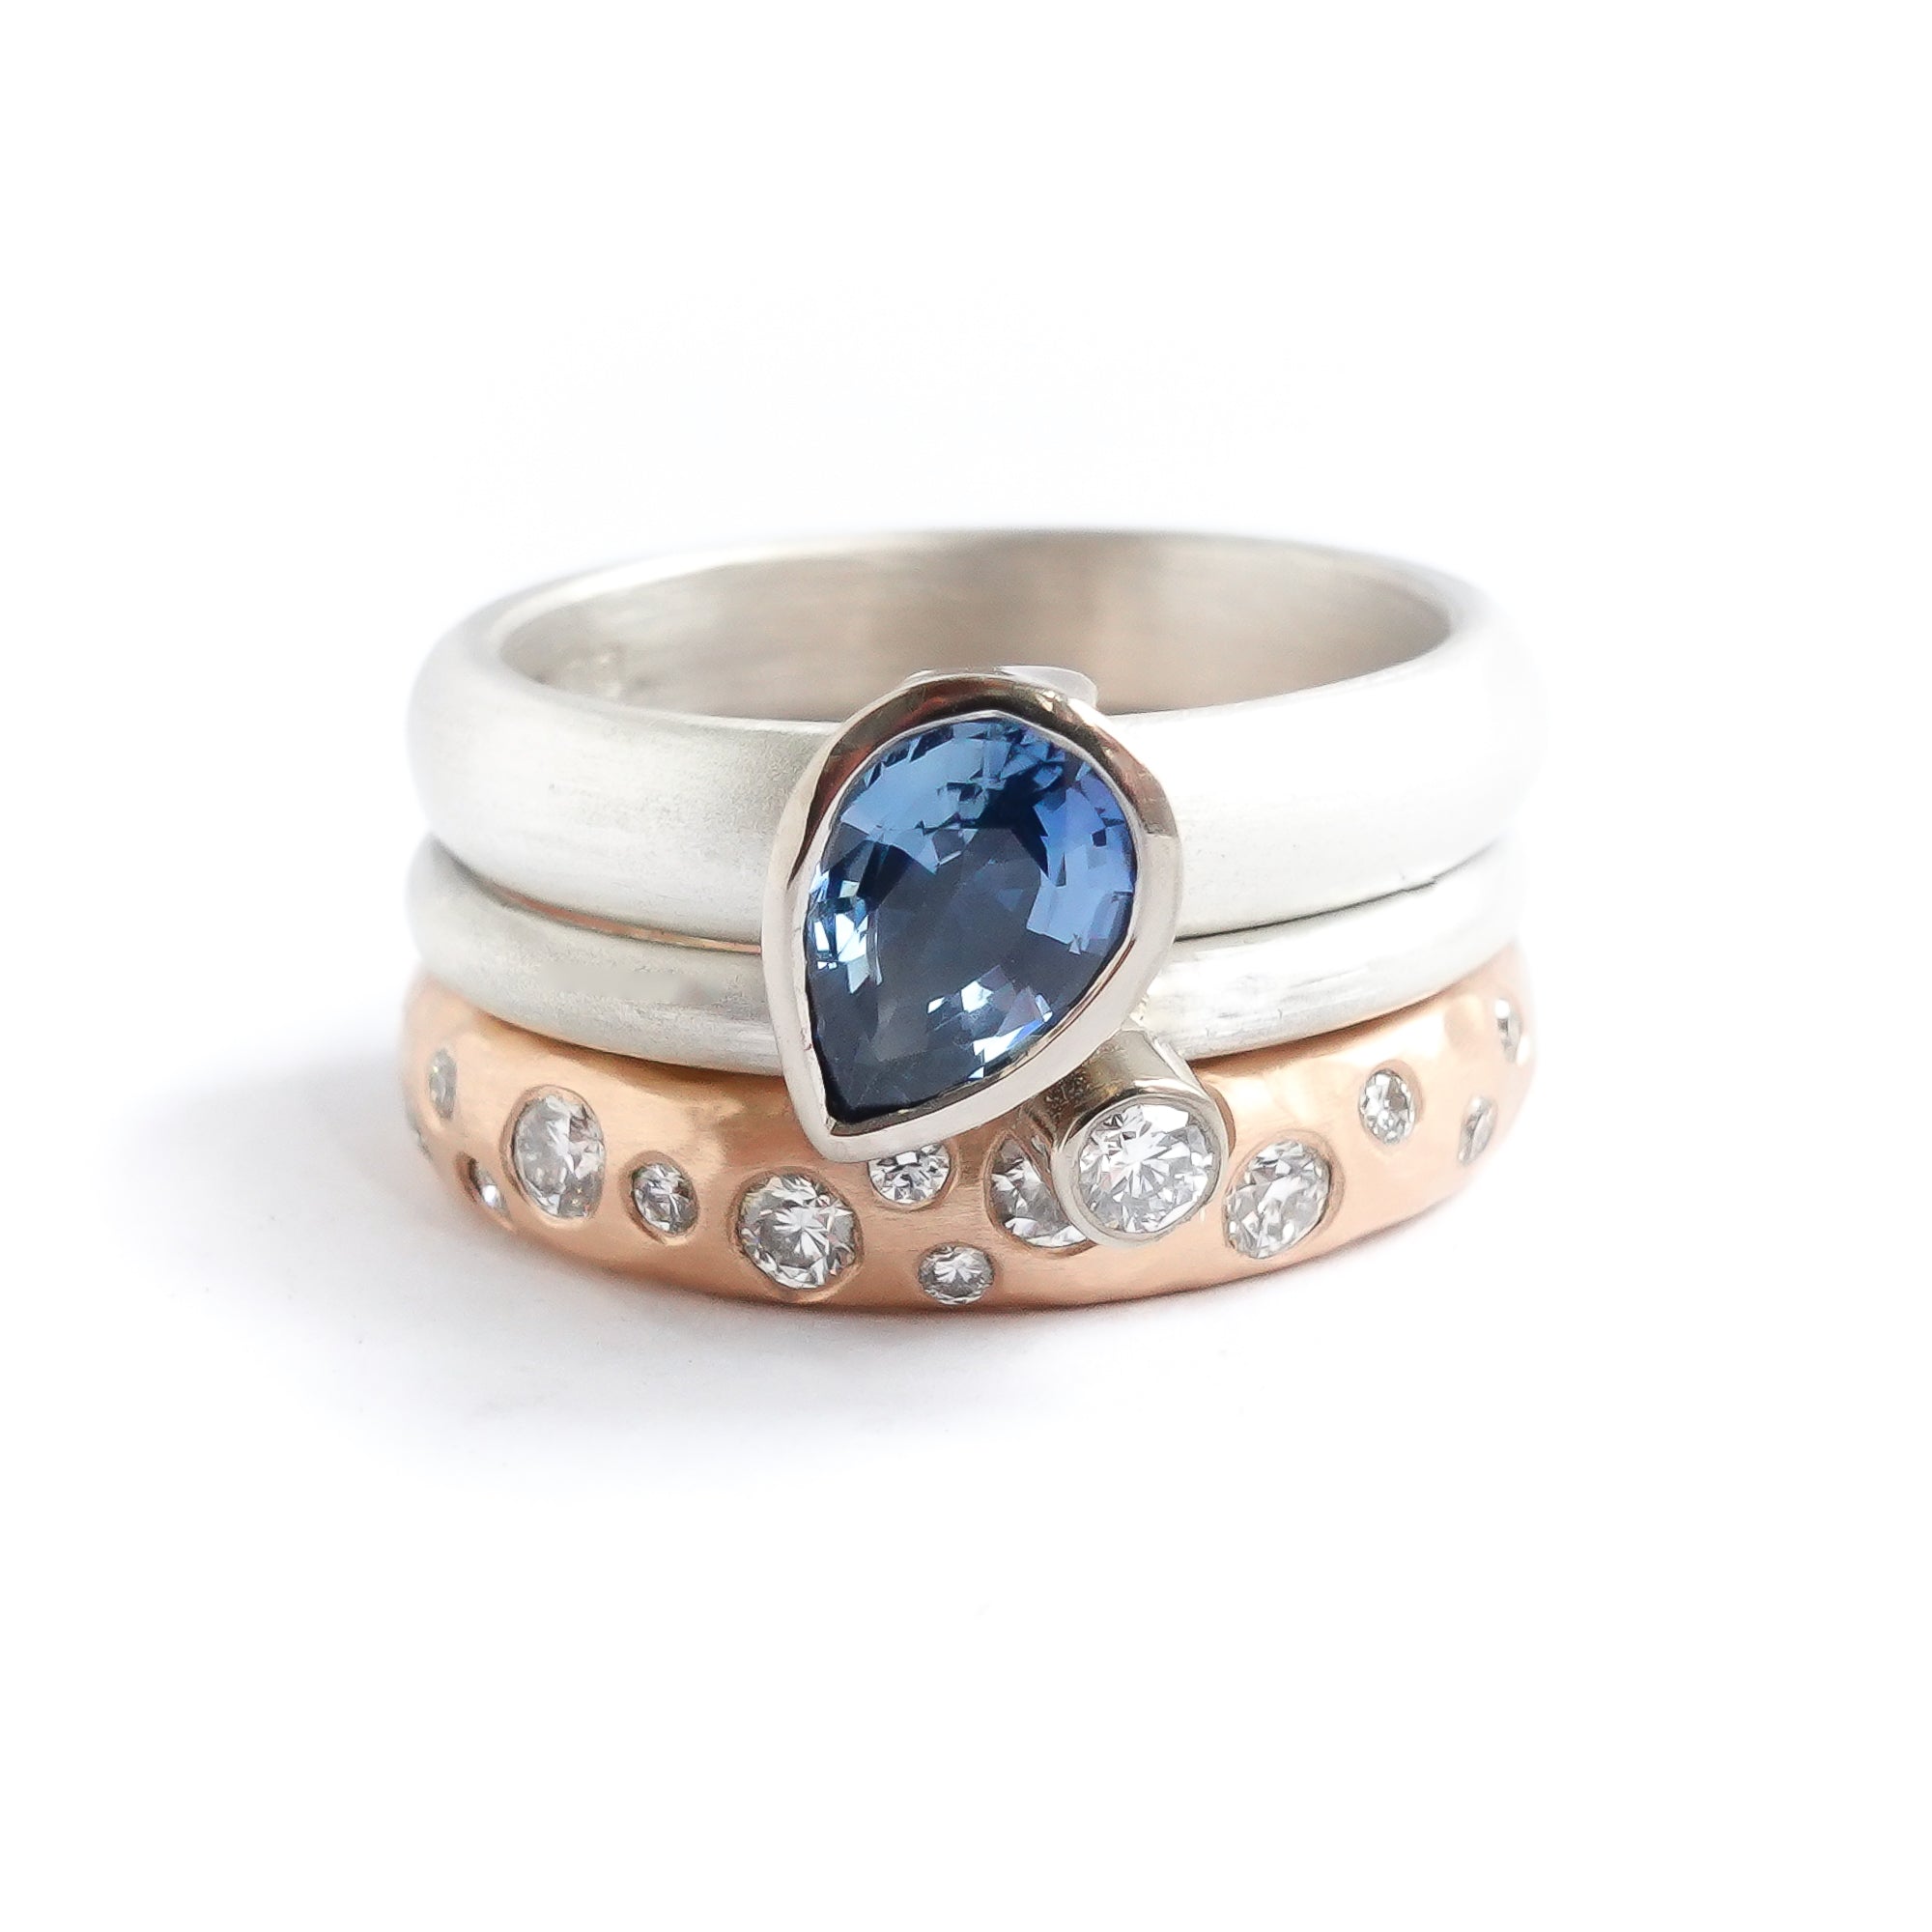 Silver and sapphire two band silver ring contemporary bespoke handmade Sue Lane